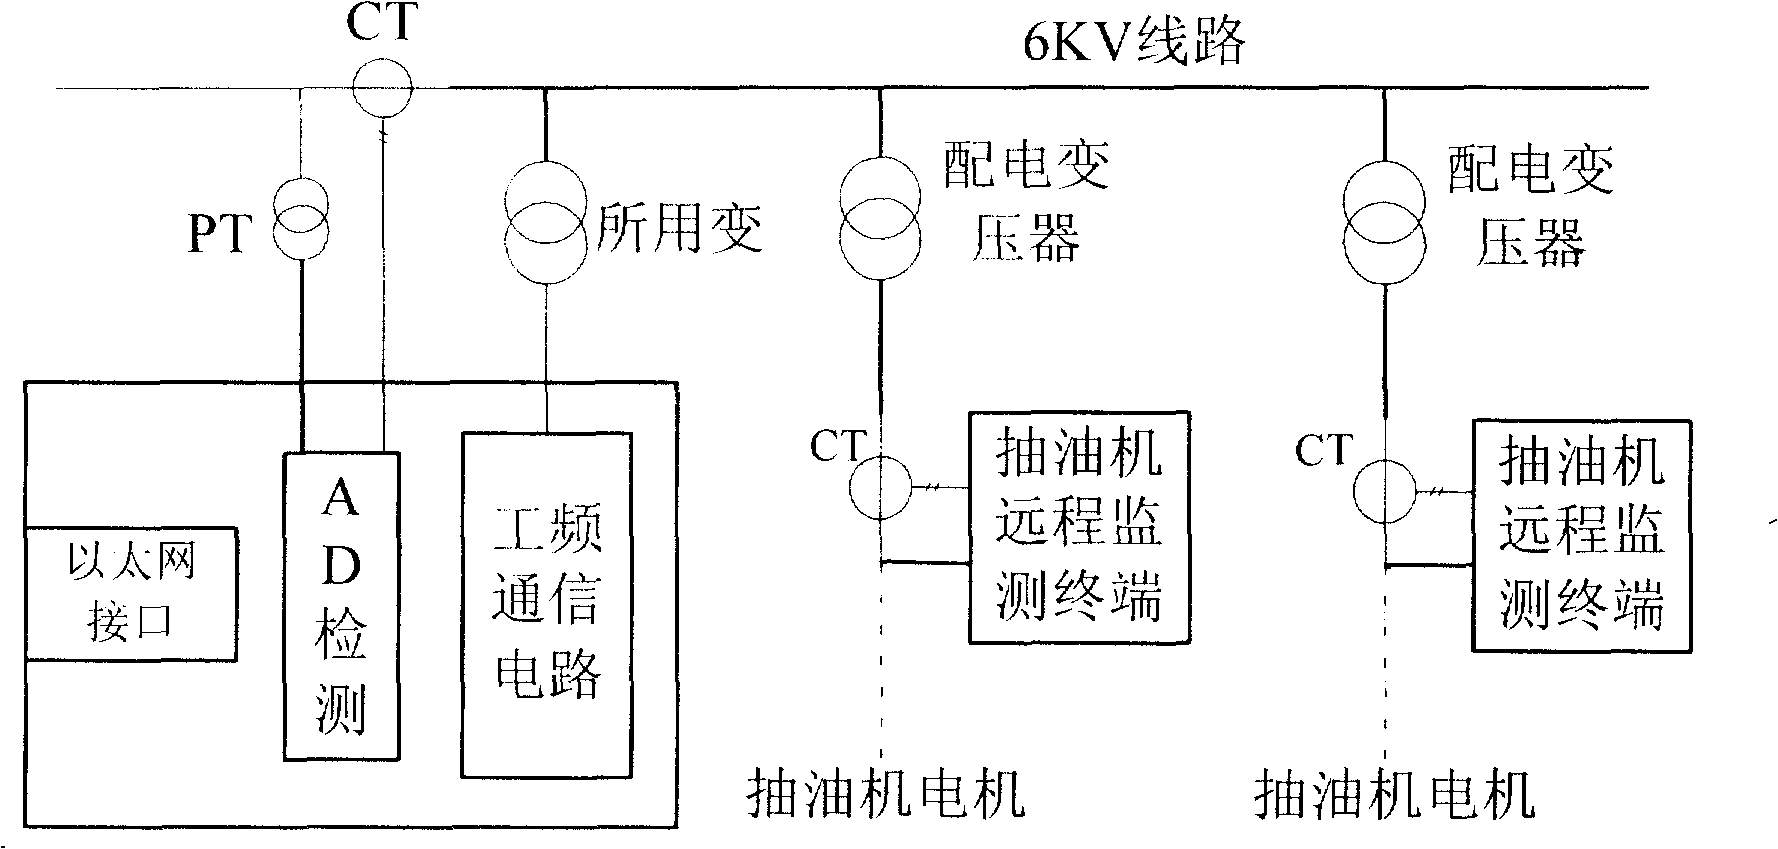 Remote monitoring method and system of electric motor of oil extractor based on power-frequency communication of electric wires